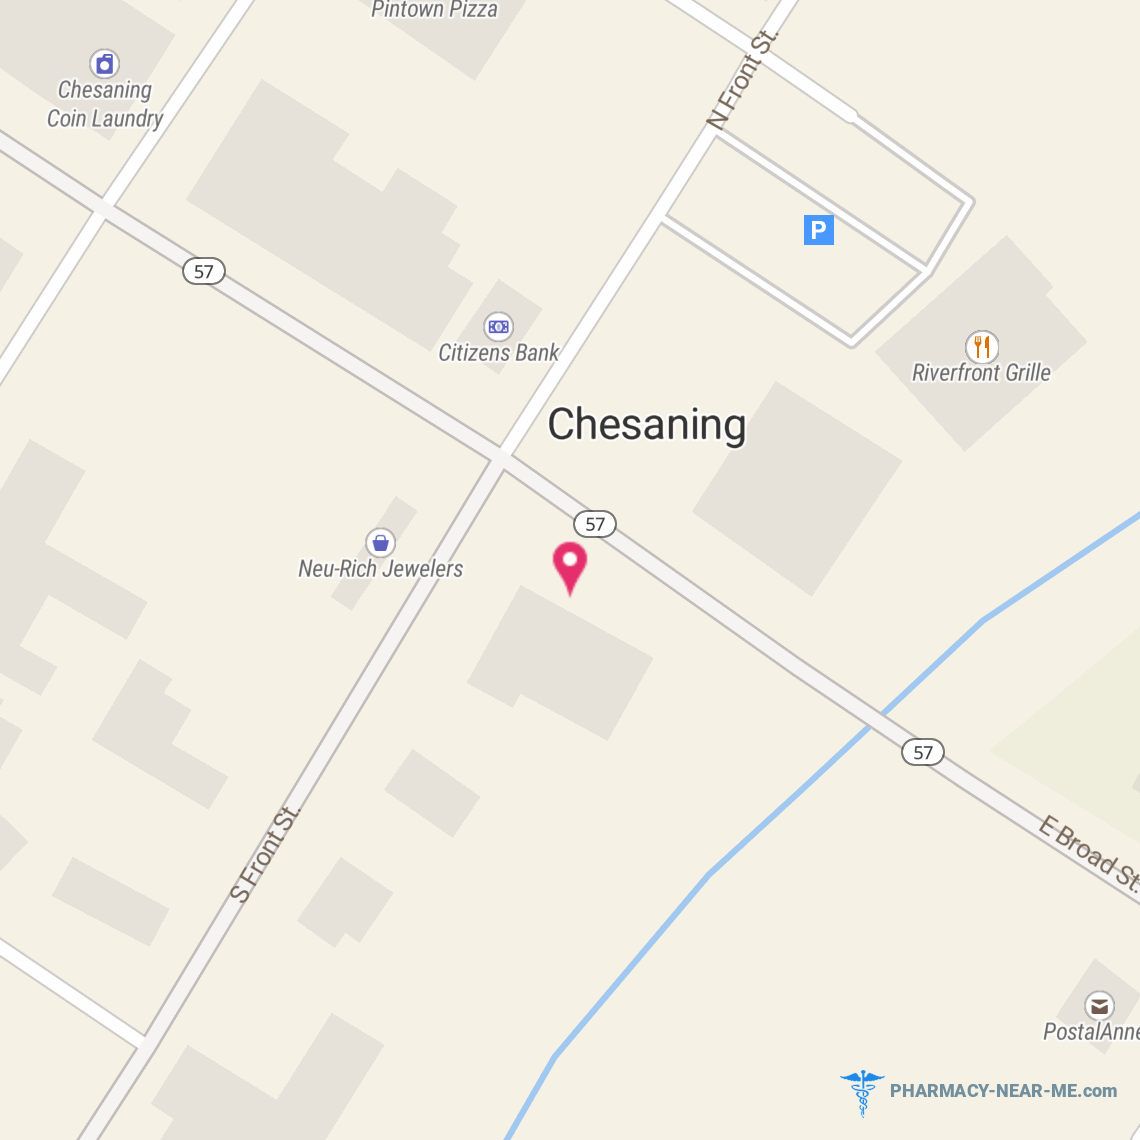 CENTRAL PHARMACY-CHESANING, LLC - Pharmacy Hours, Phone, Reviews & Information: 126 West Broad Street, Chesaning, Michigan 48616, United States